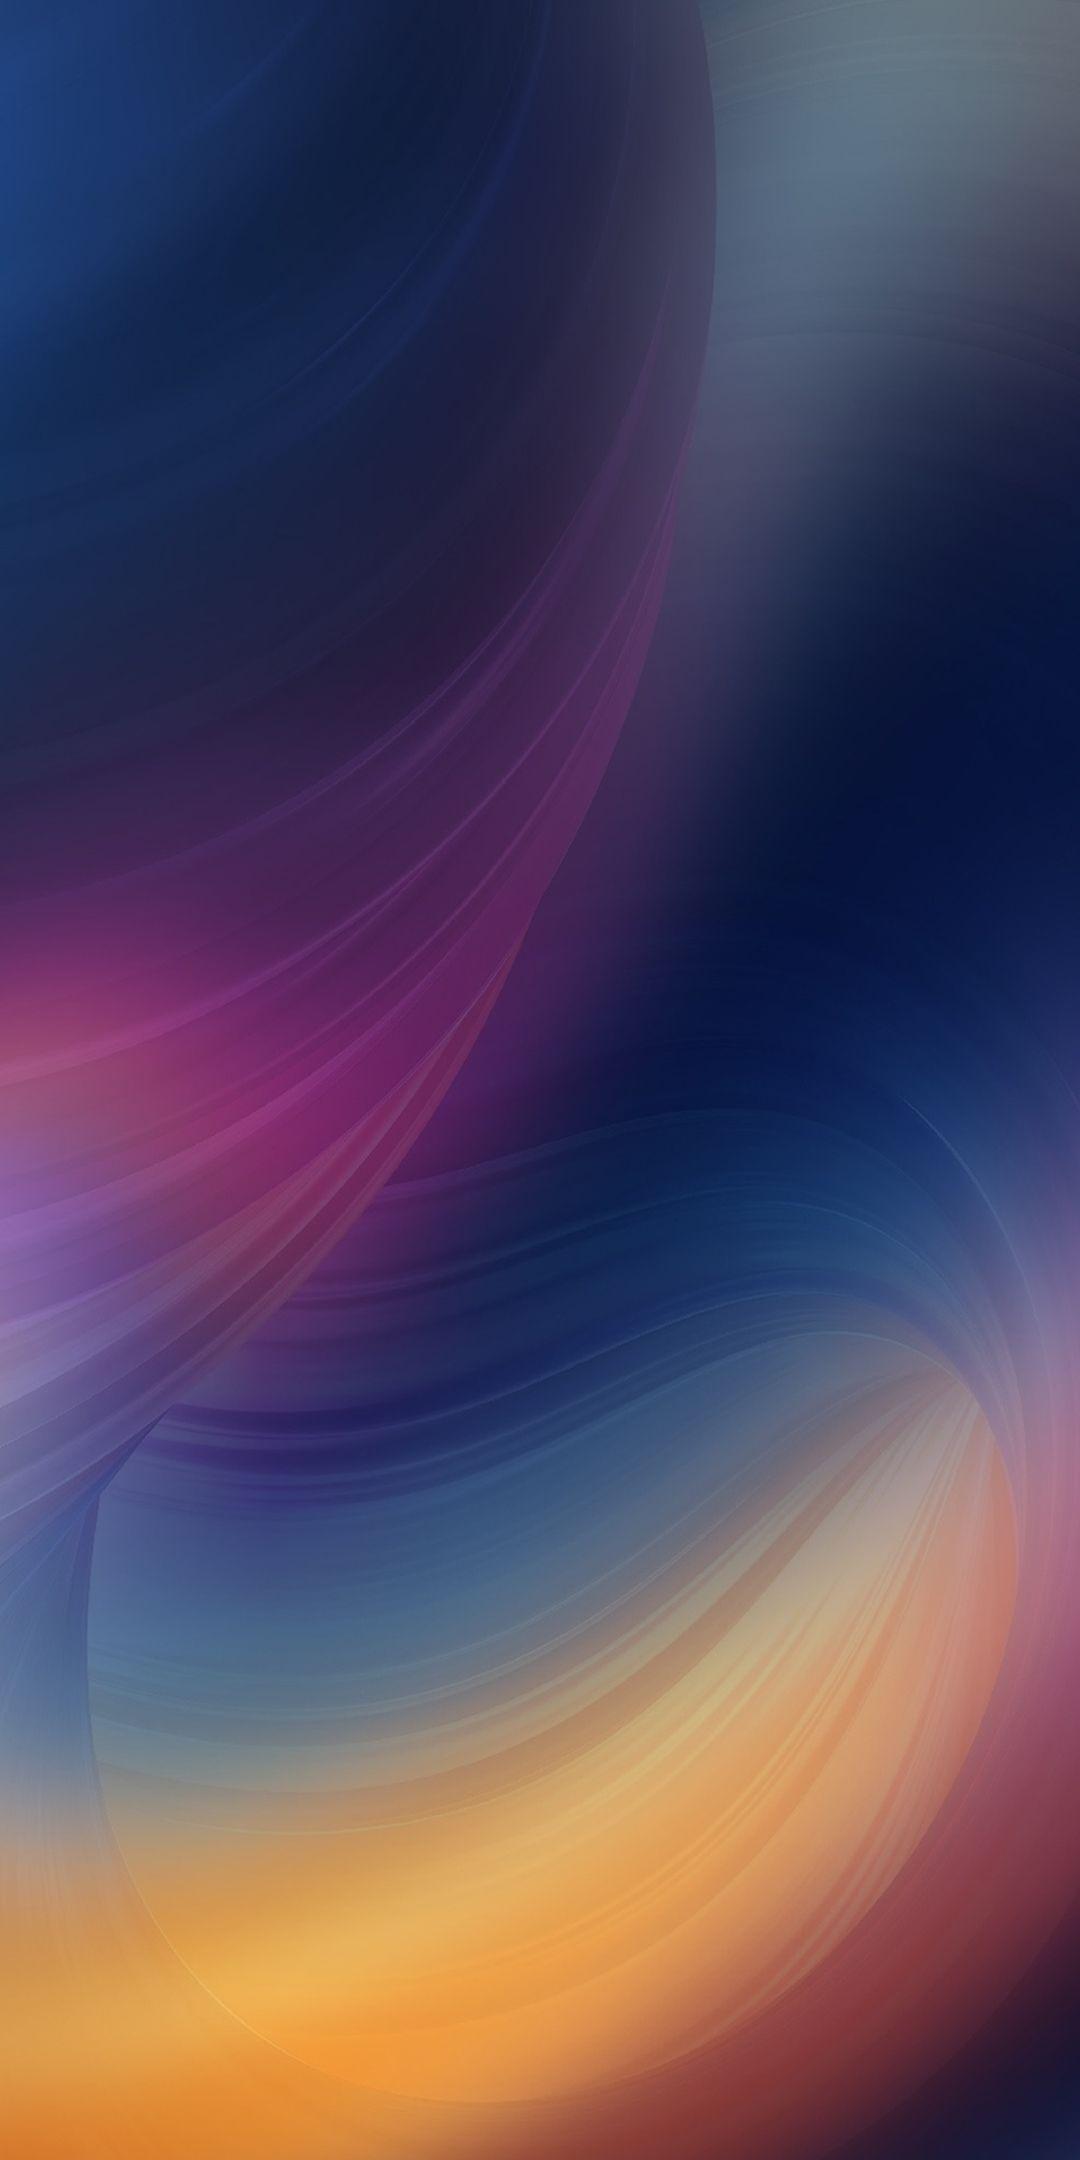 Huawei Mate 10 Pro Wallpaper 05 of 10 with Abstract Light. iPhone